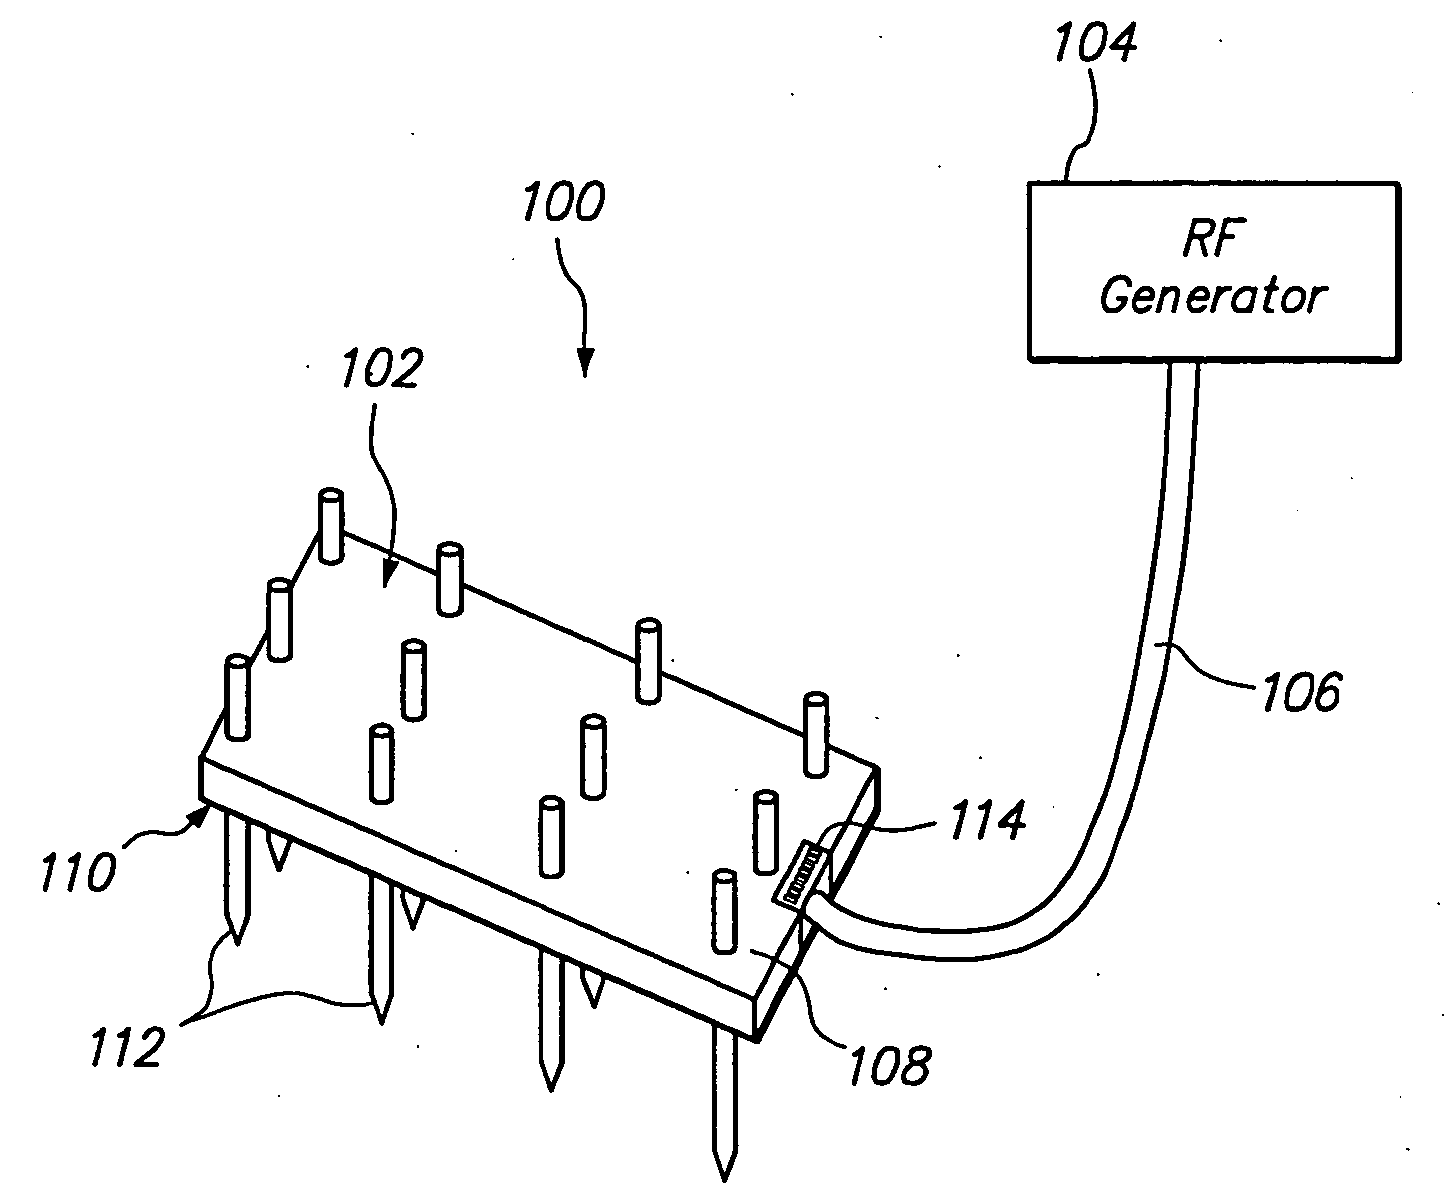 Surface electrode multiple mode operation